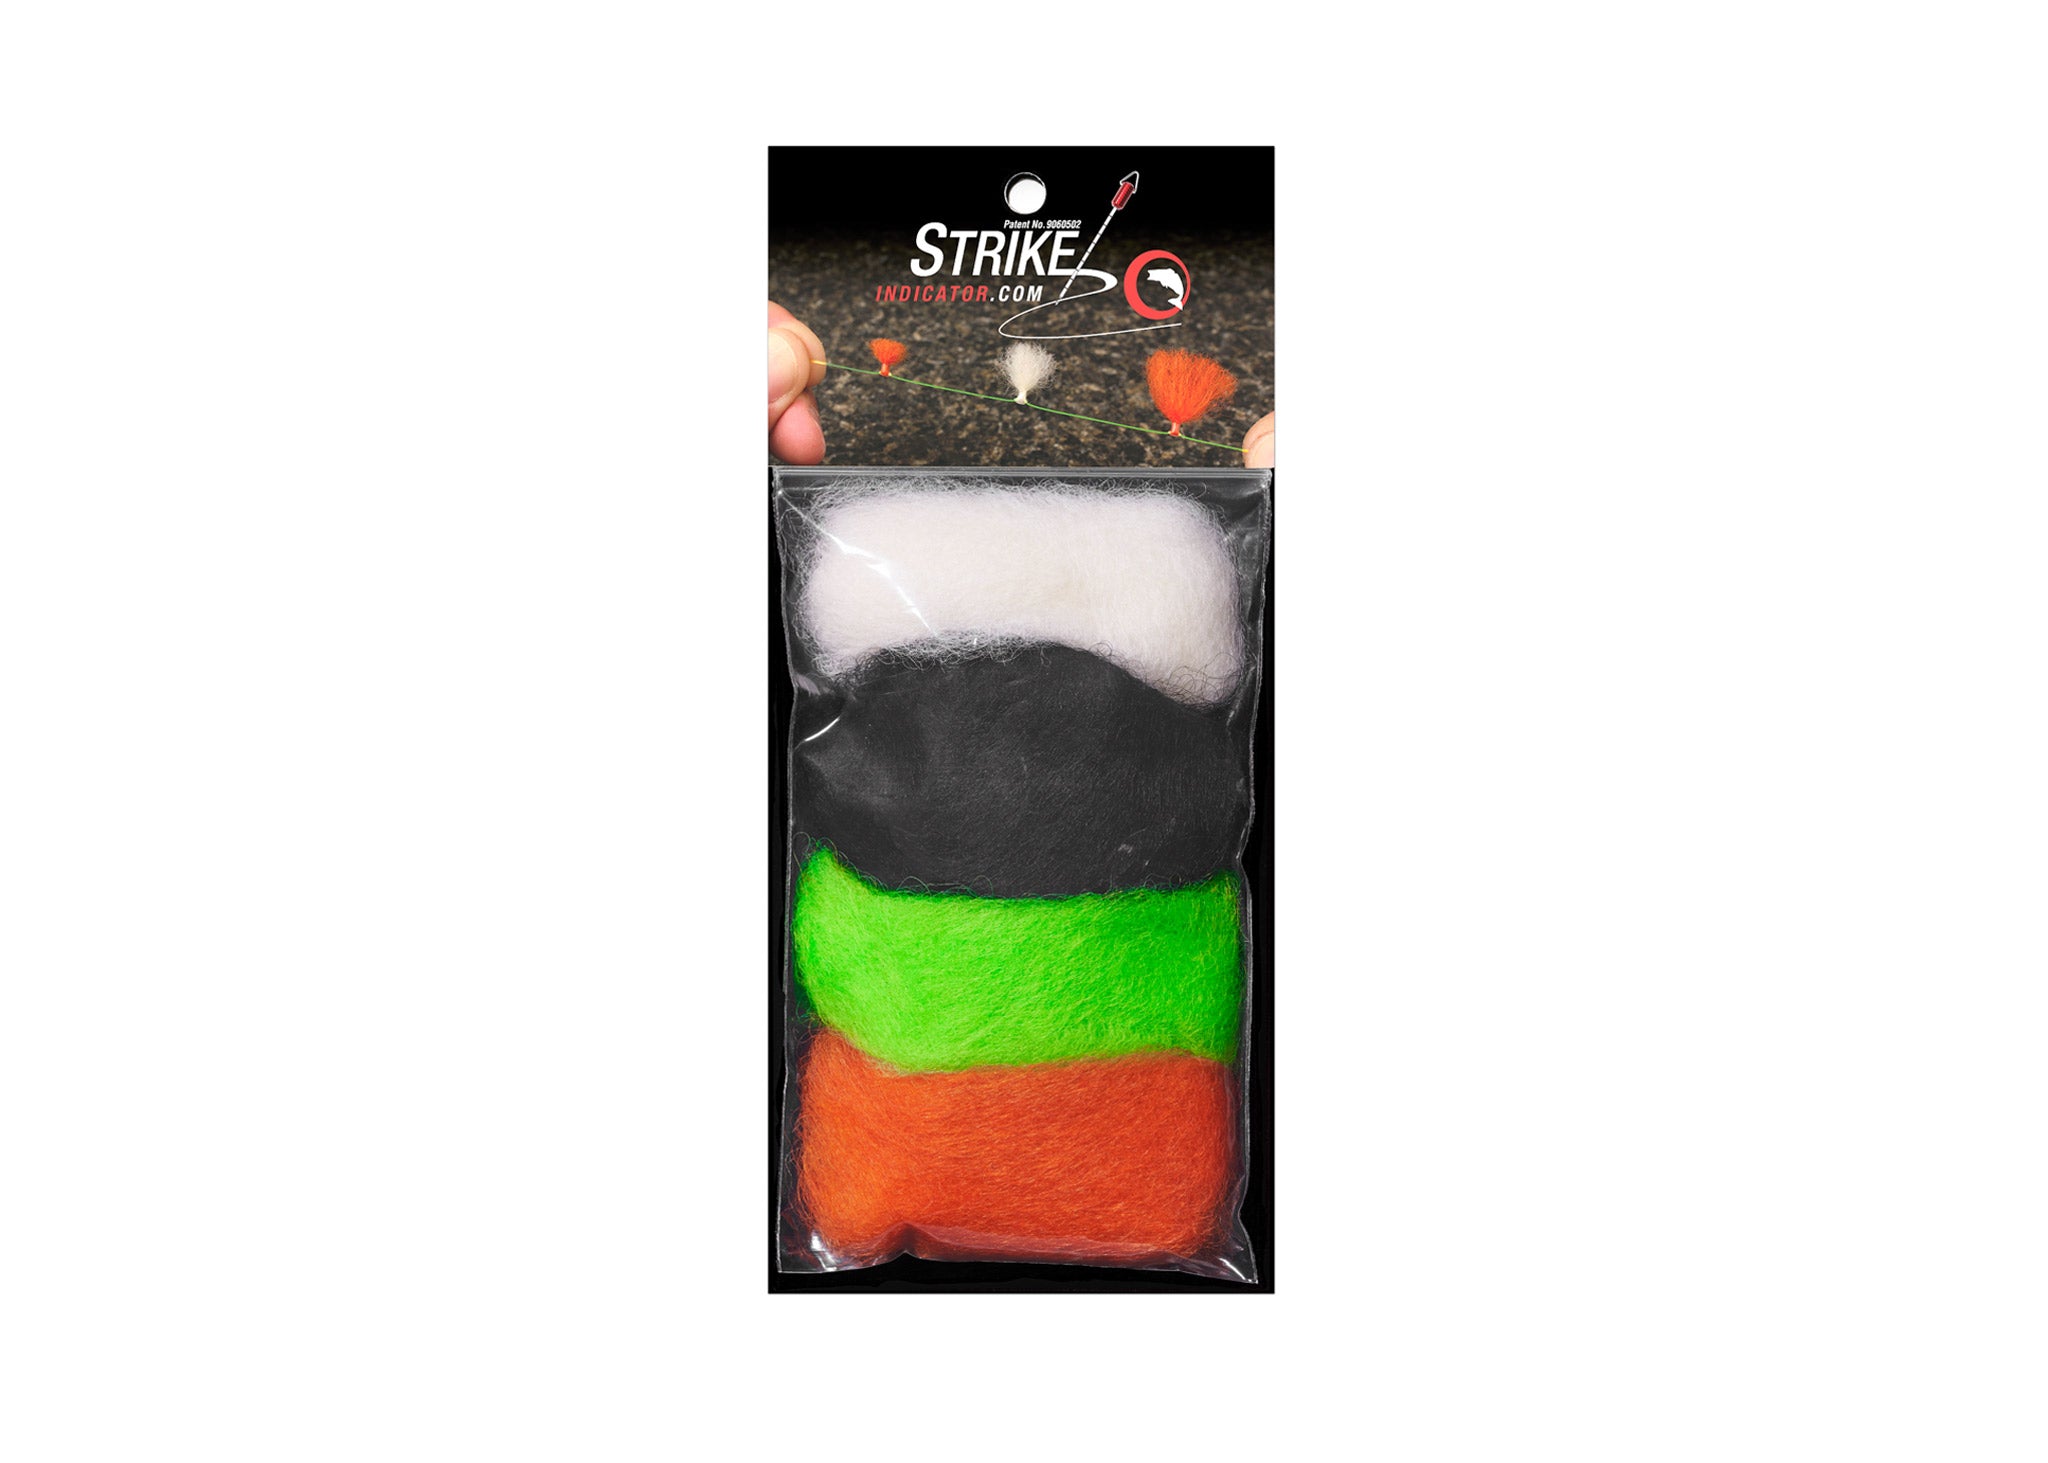  Wool Strike Indicator Tool Fly Fishing Float Accessory for The  : Sports & Outdoors